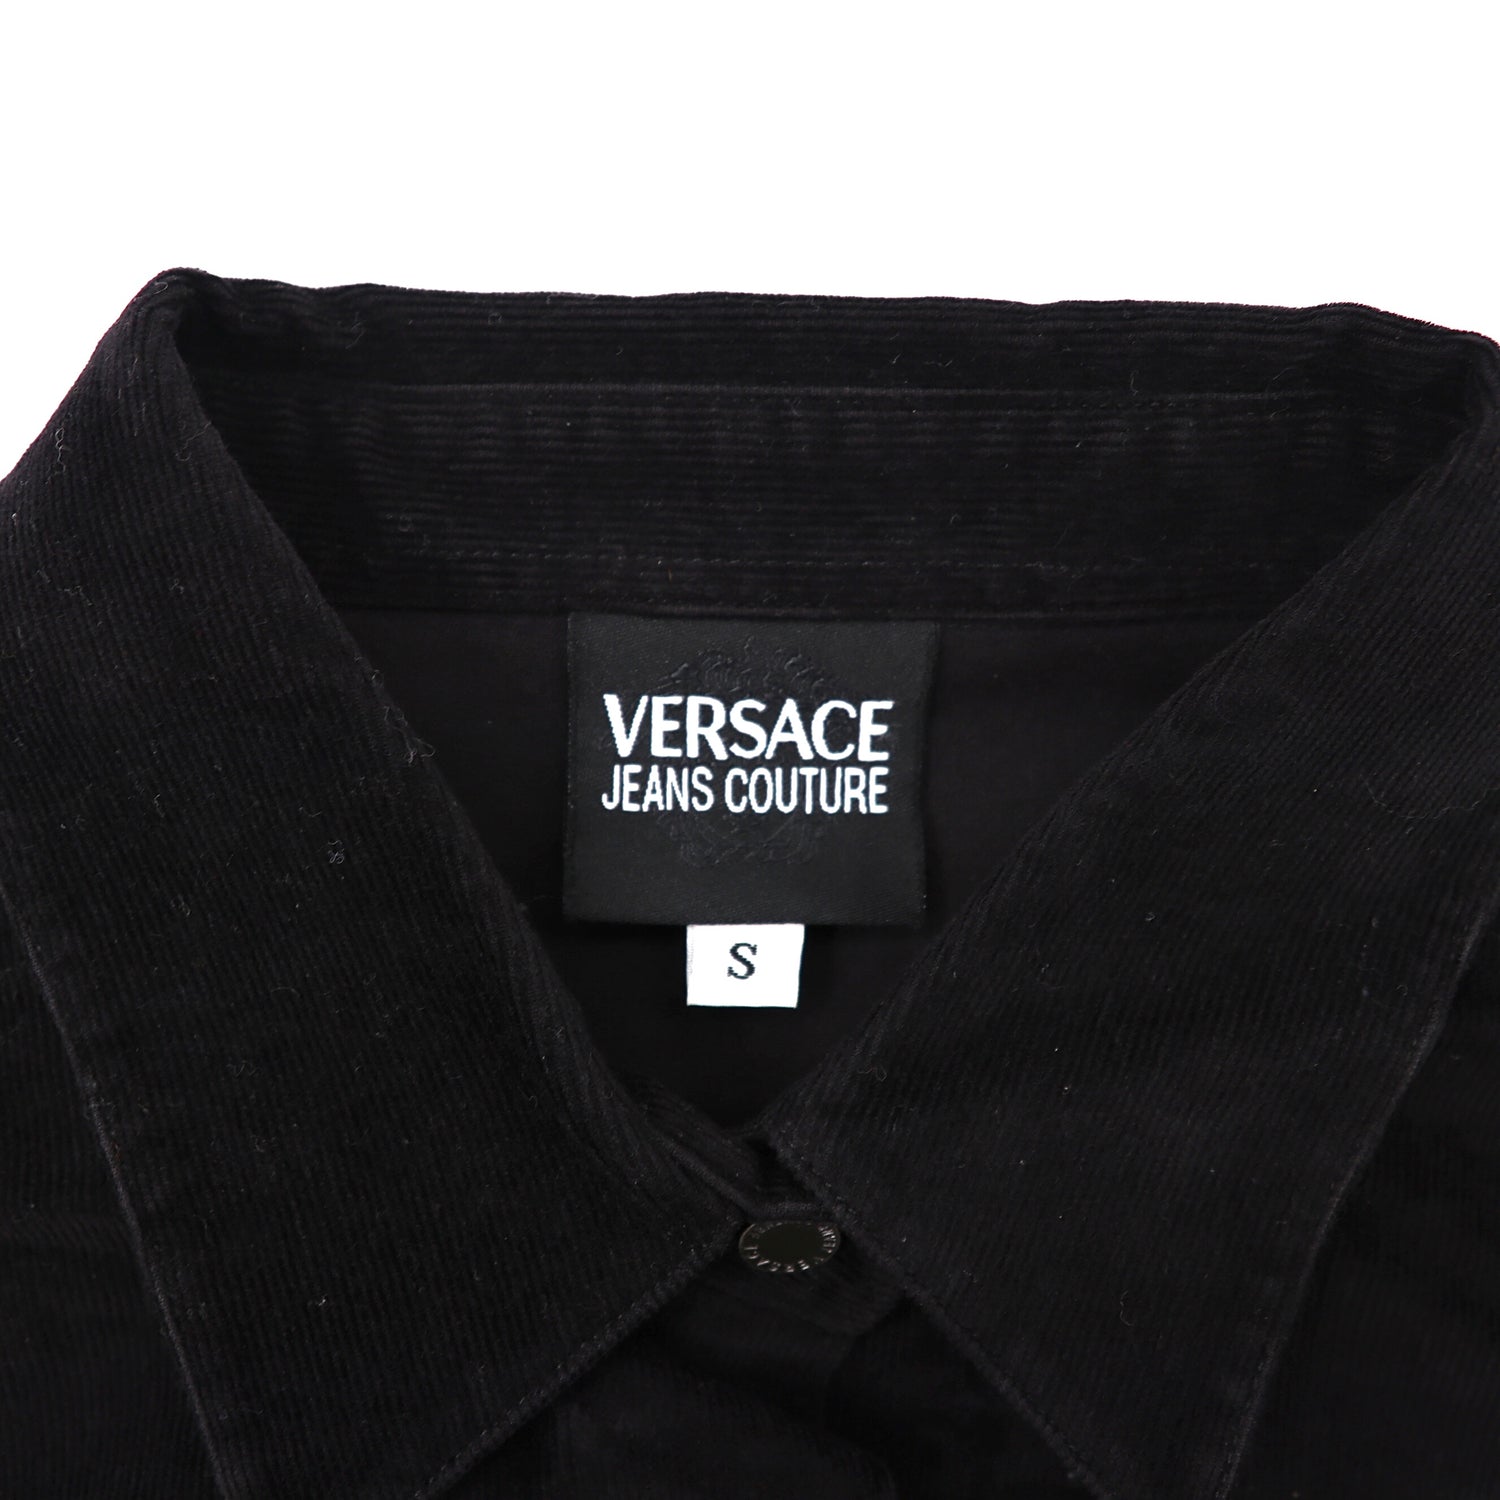 VERSACE JEANS COUTURE Corduroy shirt S Black Stretching Italian ...